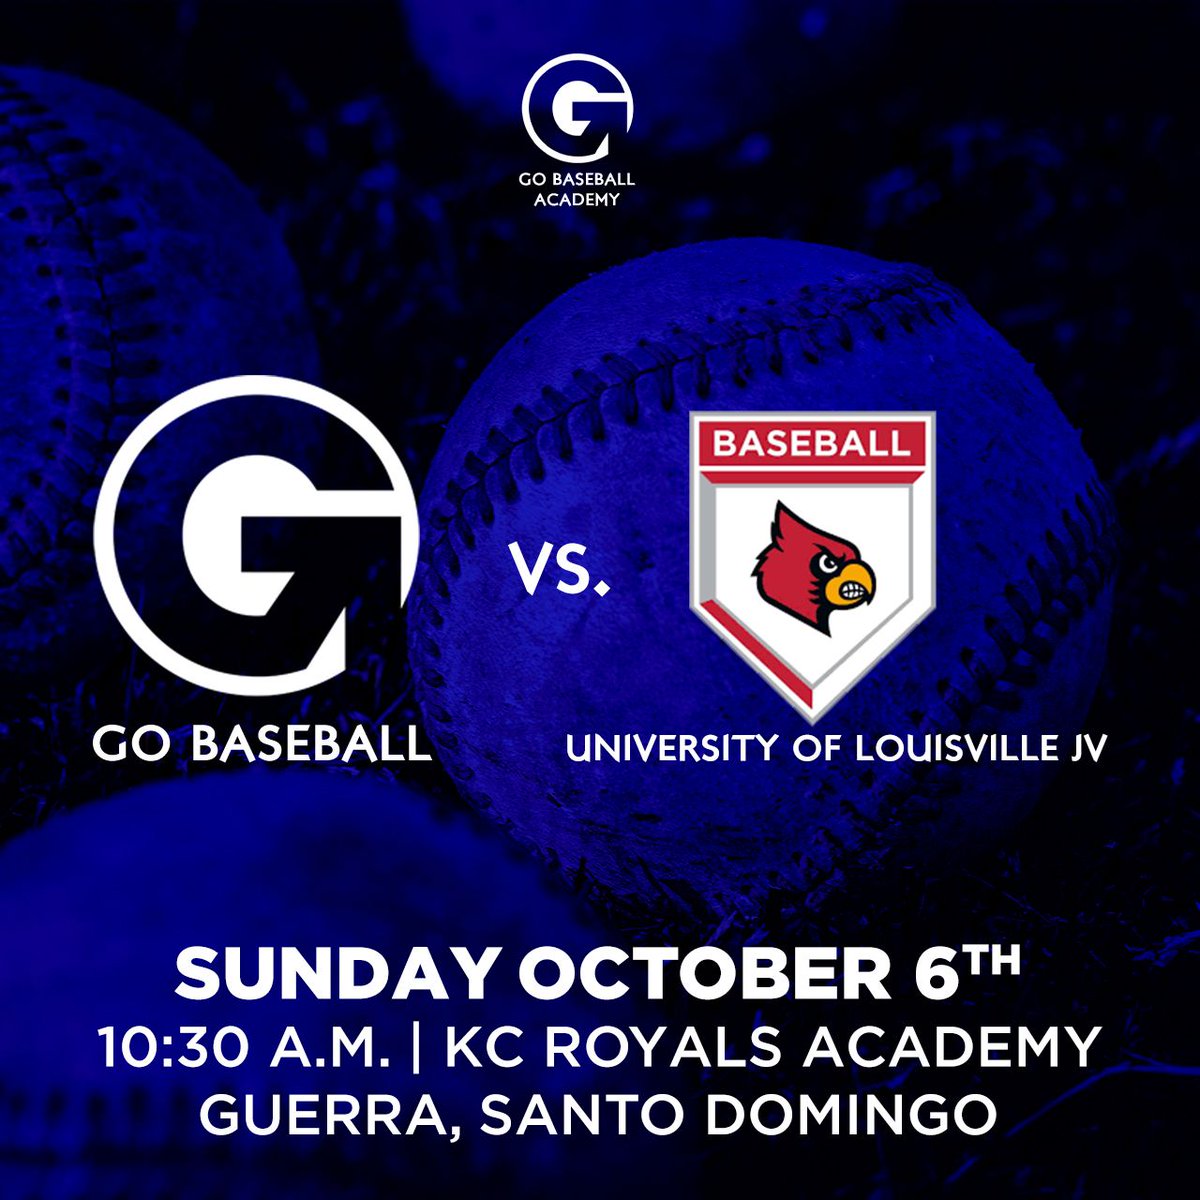 Tomorrow our #Vencedores will play against the team of the University of Louisville at the facilities of the Kansas City ROyals Academy in Guerra, Santo Domingo.

#GOsportsDR #GObaseballDR #GOteams #LouisvilleUniversity #BaseballGame